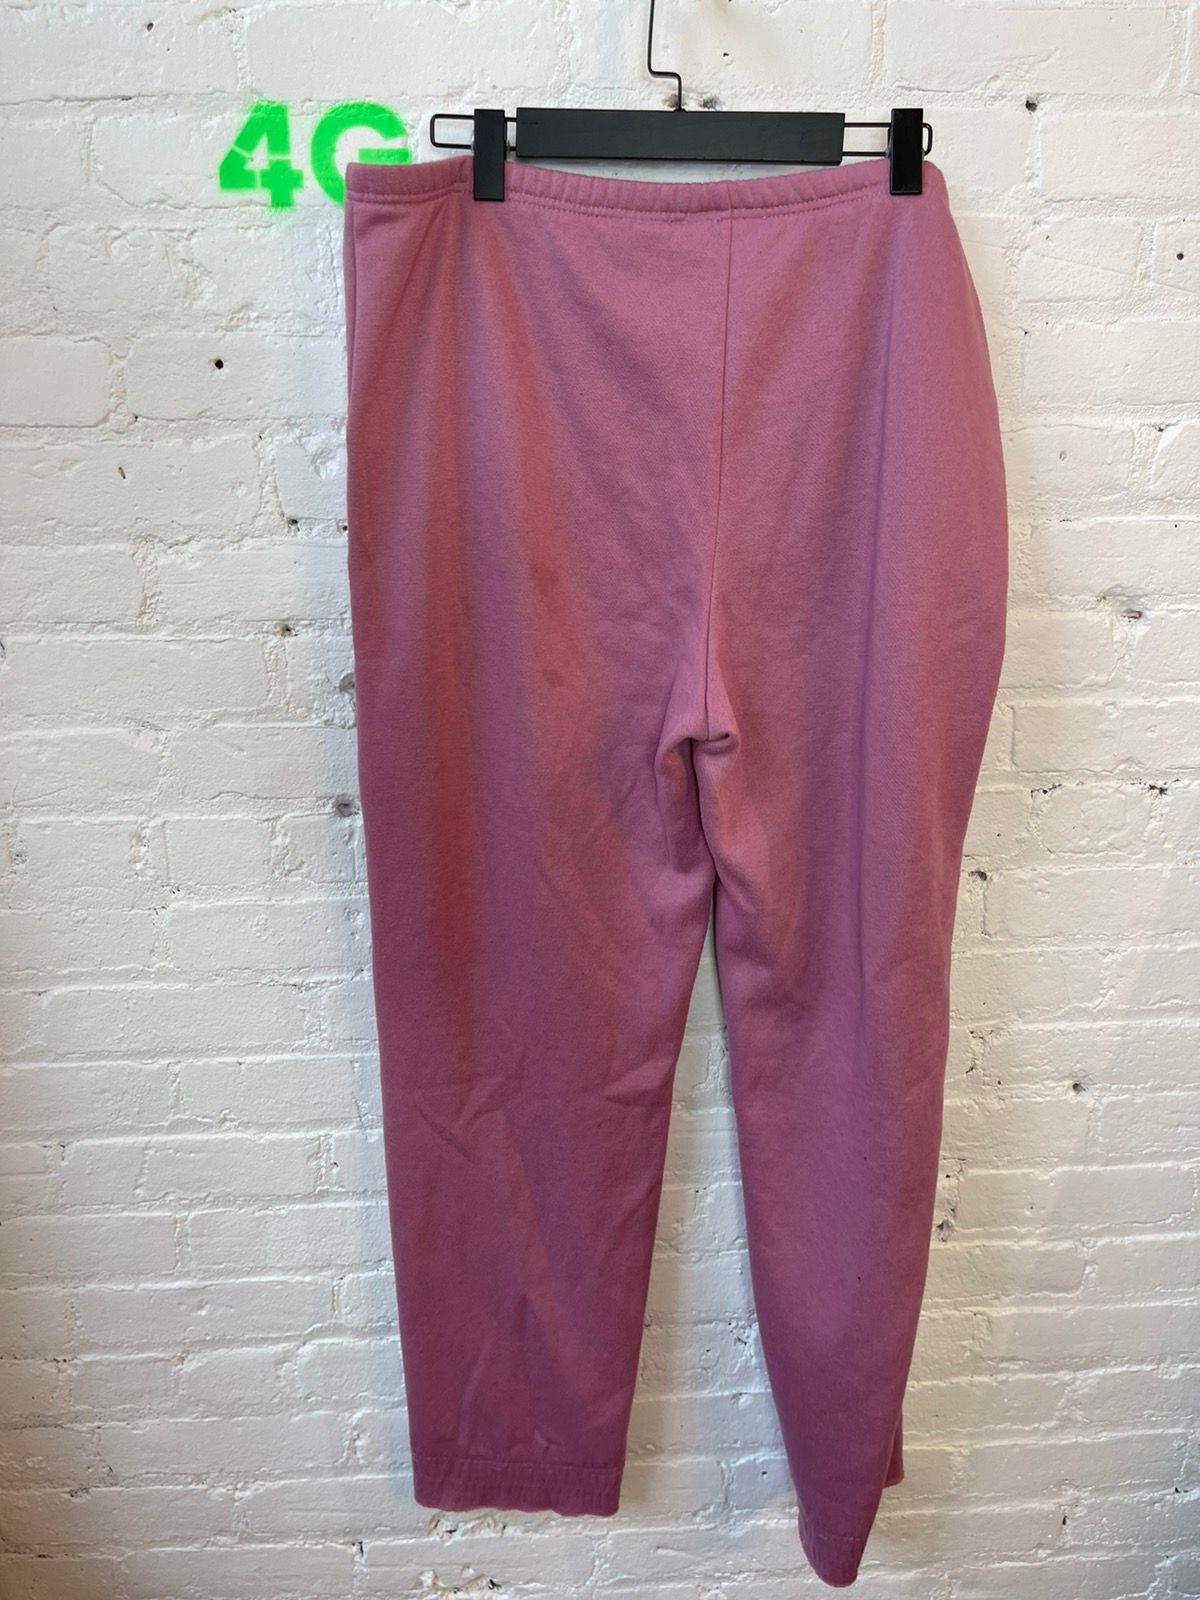 Vintage Pink OLD Person Geriatric Sweatpants Joggers PINK